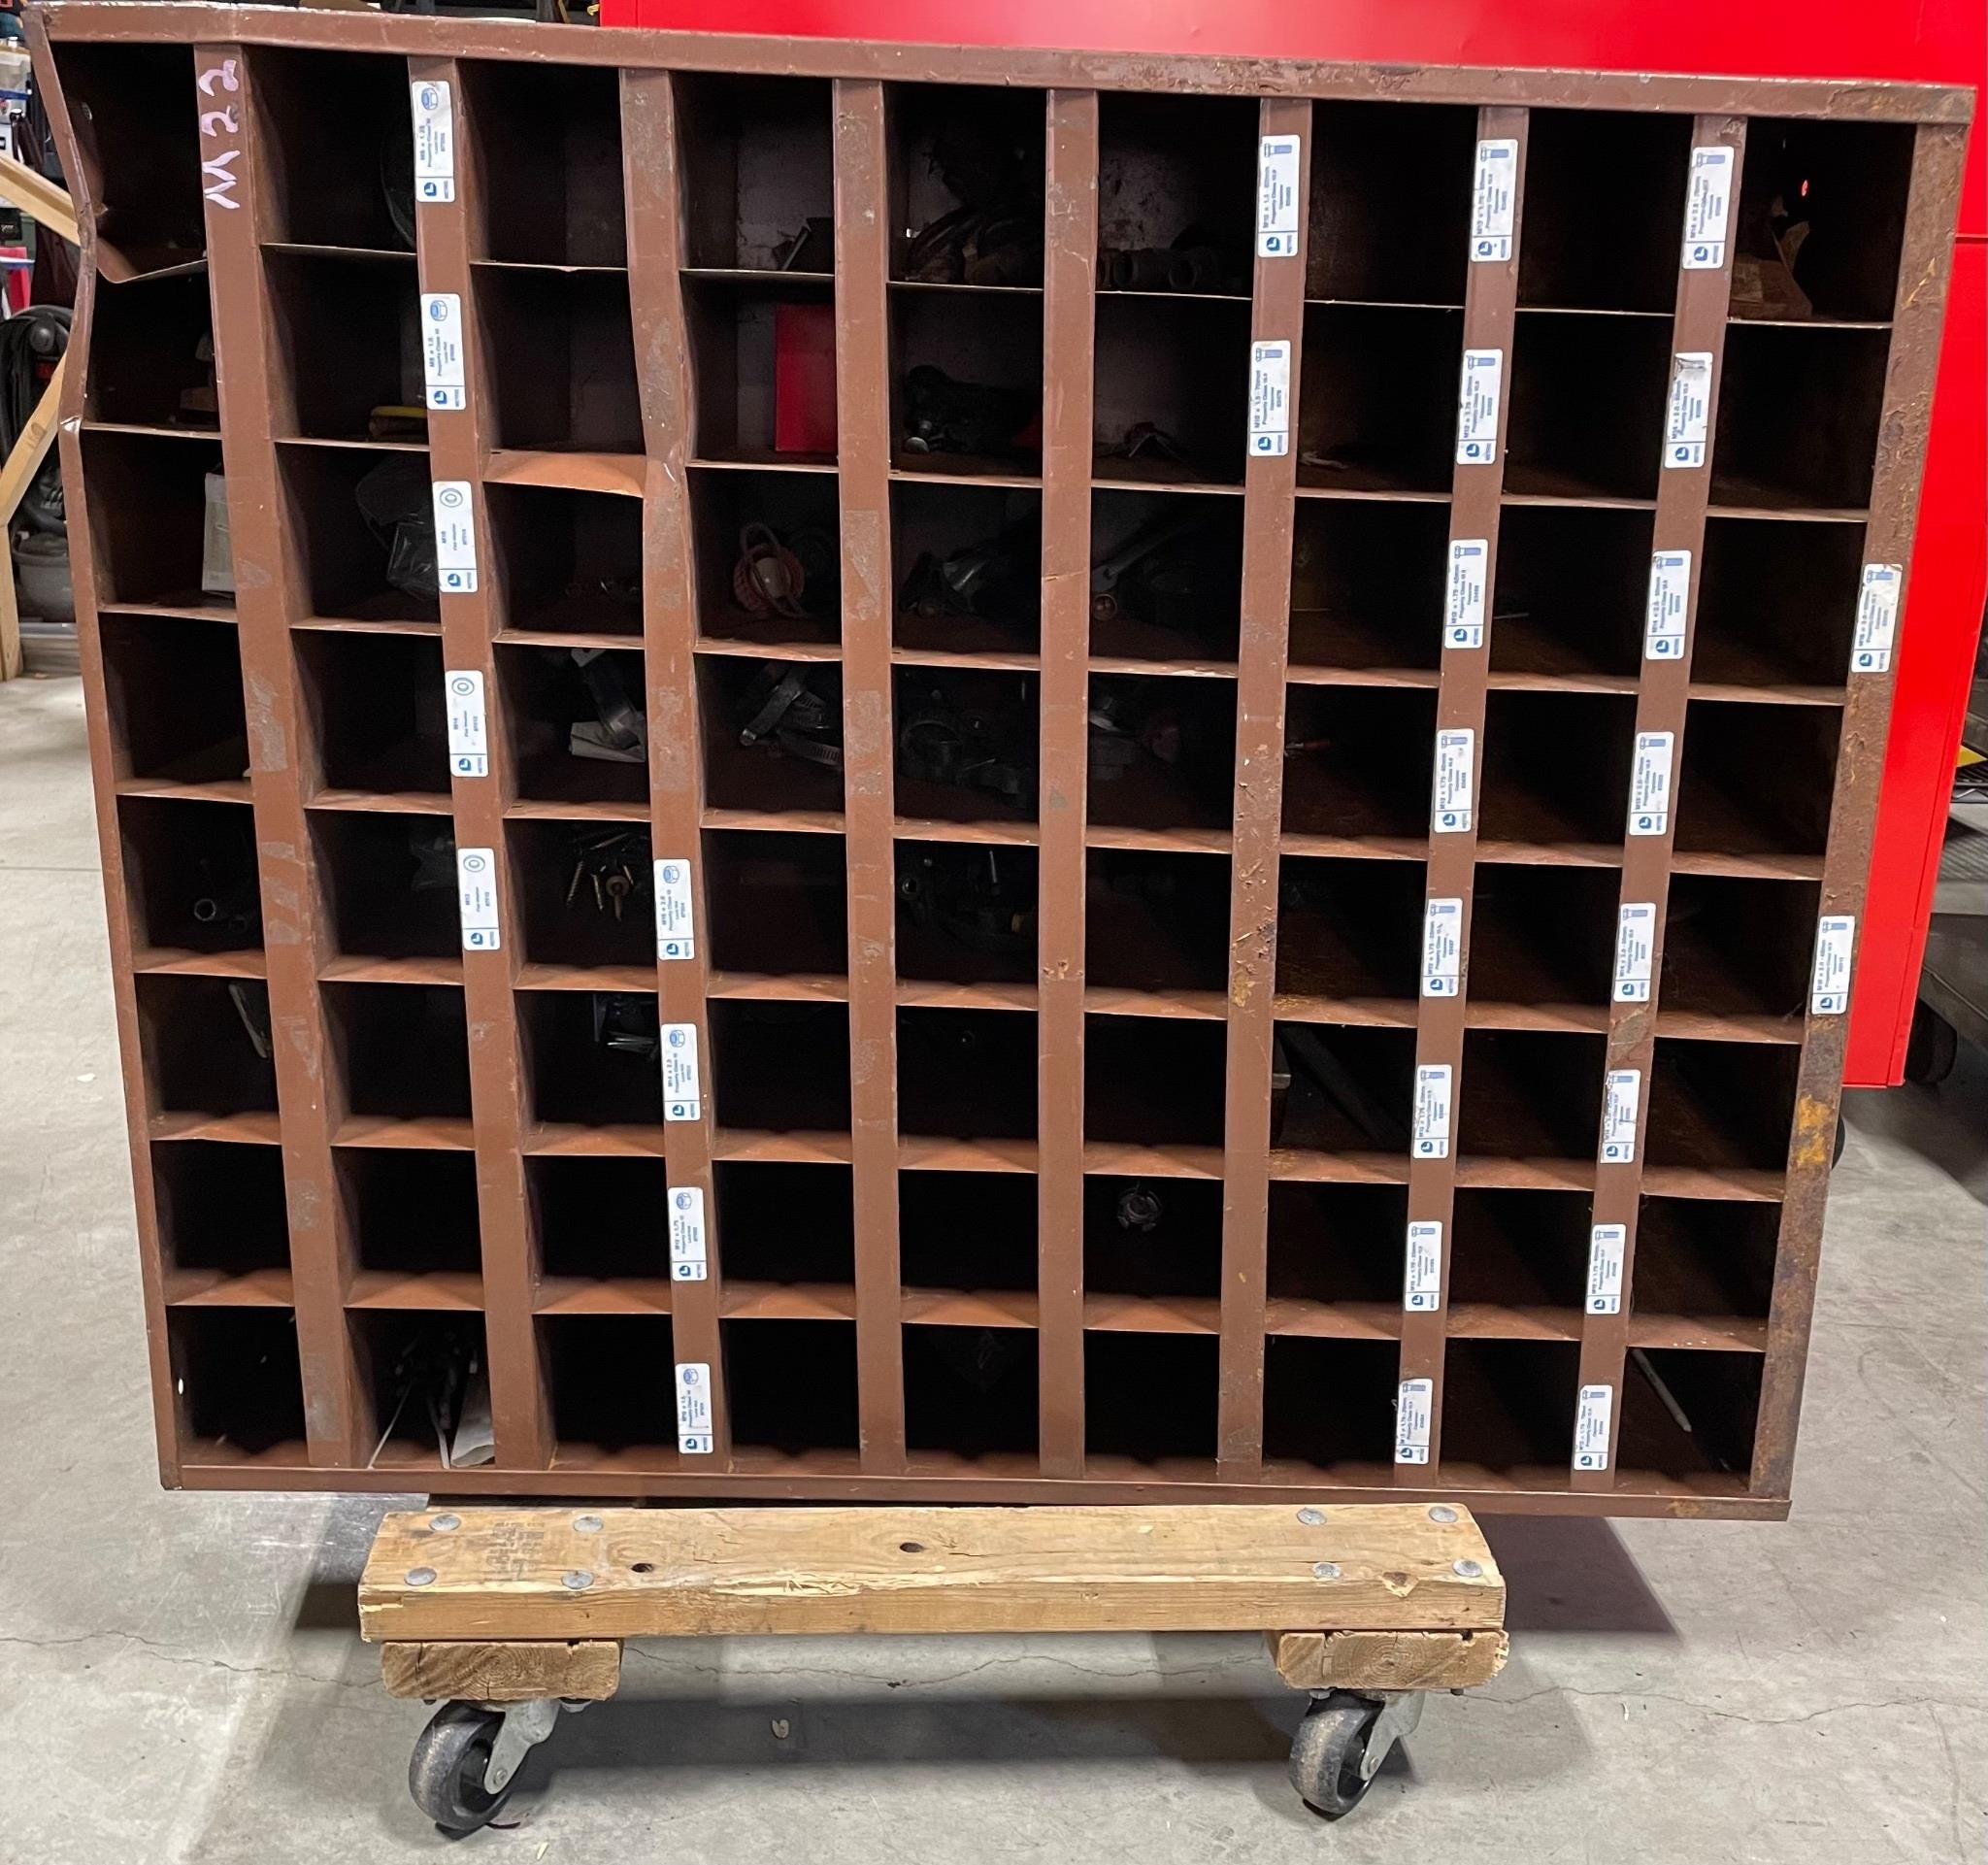 72 Compartment Screws And Fittings Organizer